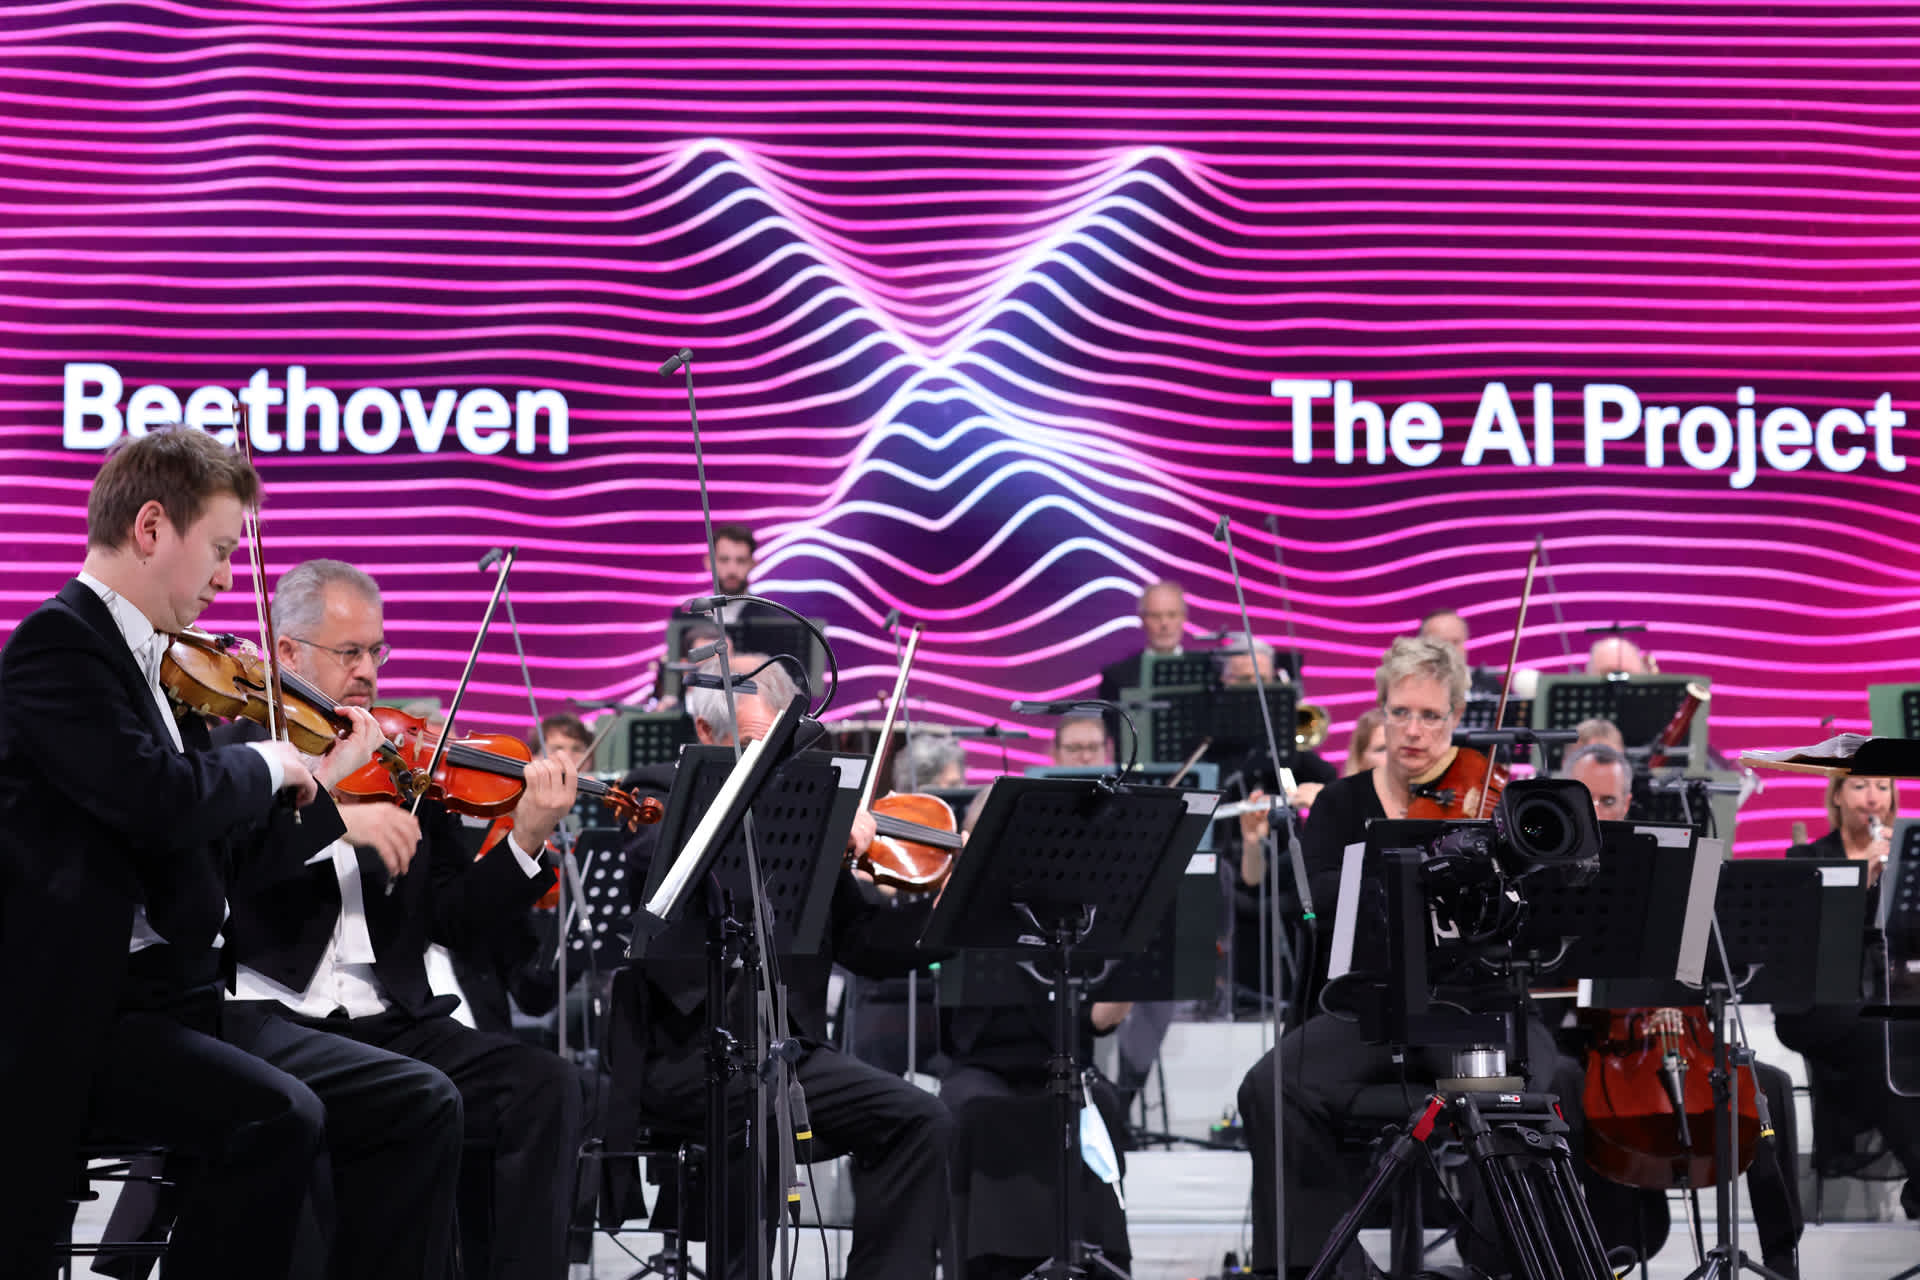 An orchestra playing in front of a large digital display that says, “Beethoven X  The AI Project”